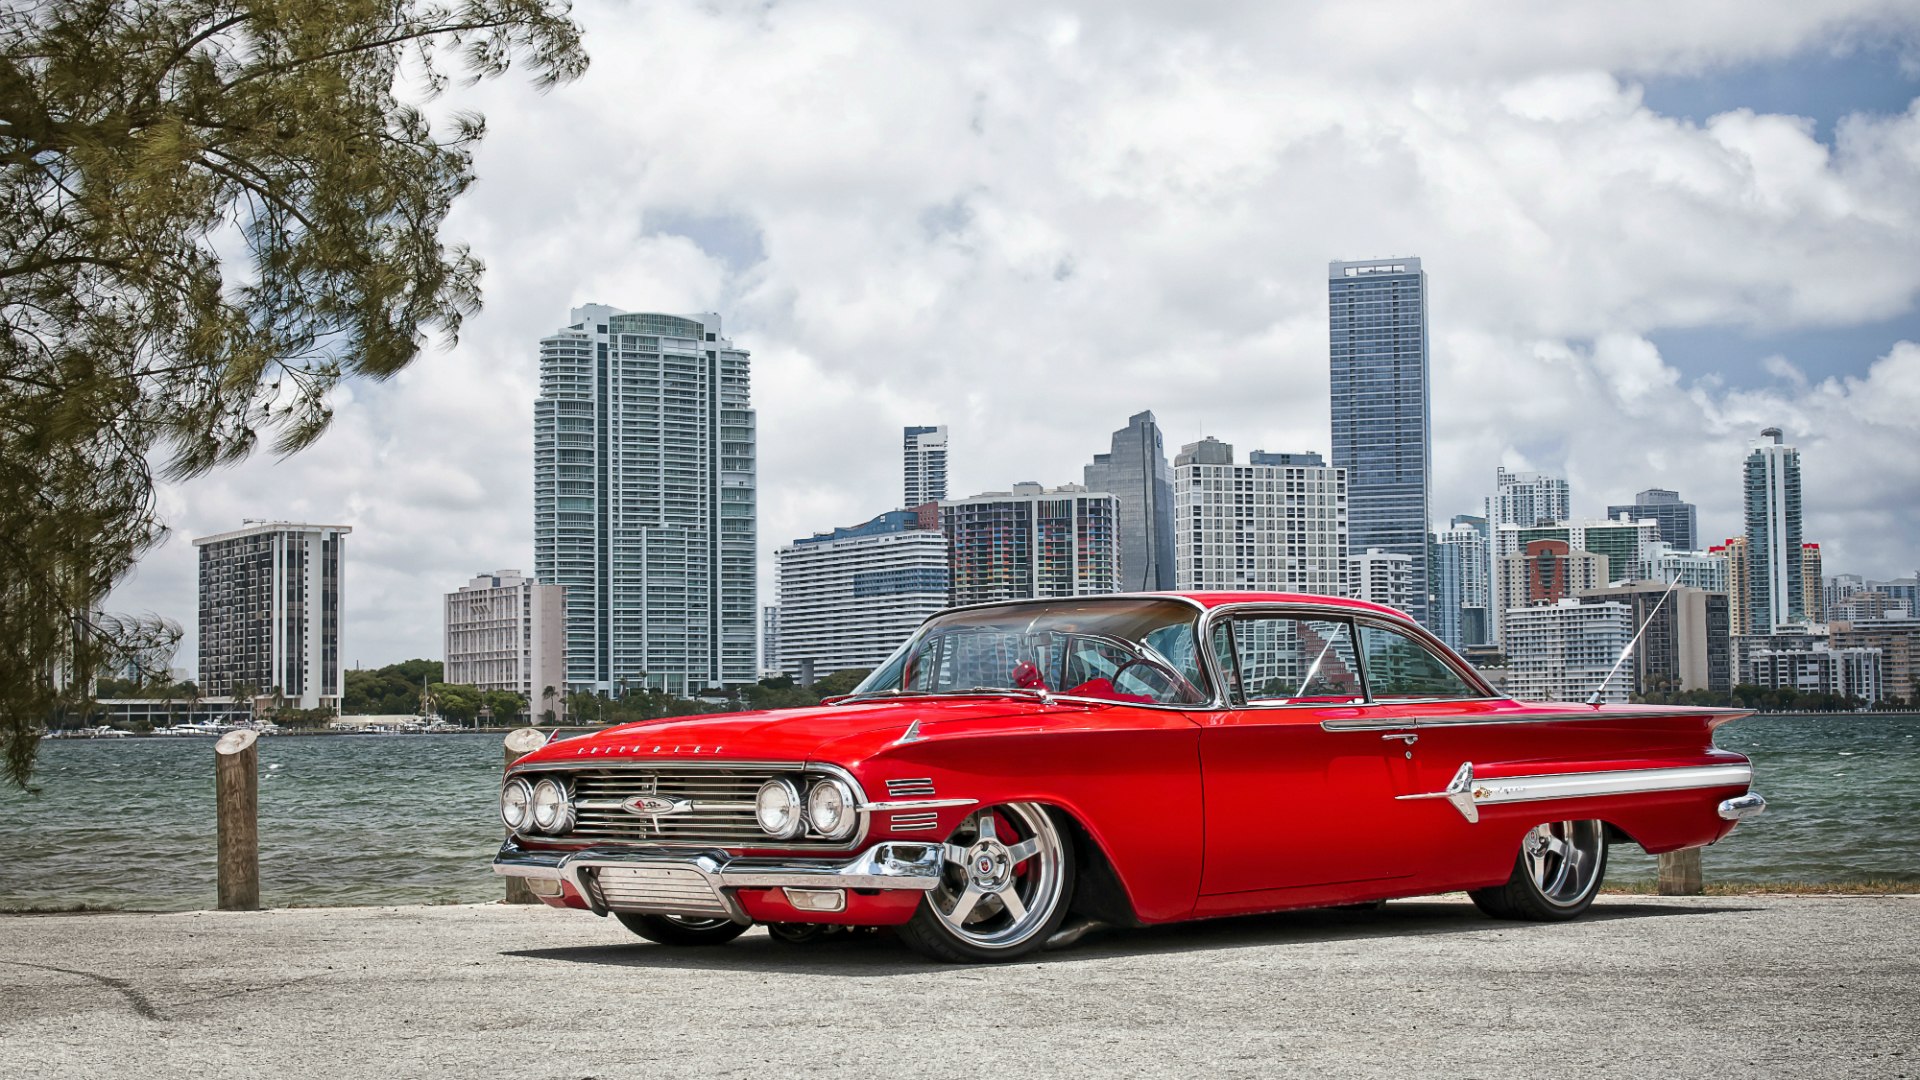 Beautiful Chevrolet Impala Wallpaper Full HD Pictures